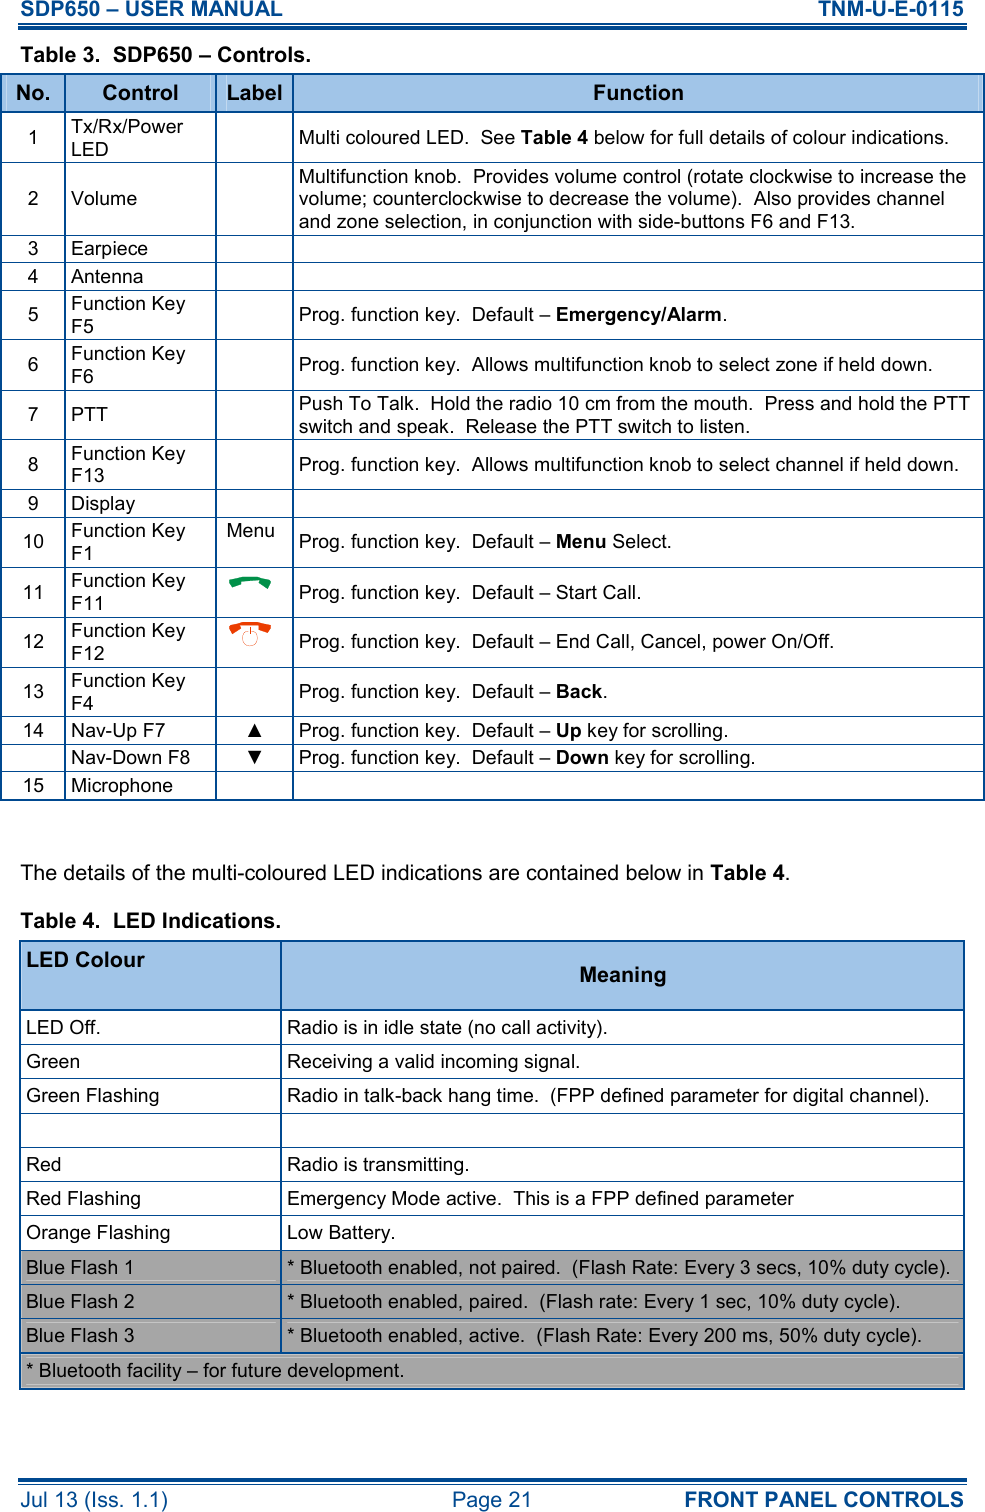 SDP650 – USER MANUAL  TNM-U-E-0115 Jul 13 (Iss. 1.1)  Page 21  FRONT PANEL CONTROLS Table 3.  SDP650 – Controls. No.  Control  Label Function 1  Tx/Rx/Power LED  Multi coloured LED.  See Table 4 below for full details of colour indications. 2  Volume   Multifunction knob.  Provides volume control (rotate clockwise to increase the volume; counterclockwise to decrease the volume).  Also provides channel and zone selection, in conjunction with side-buttons F6 and F13. 3  Earpiece     4  Antenna     5  Function Key F5  Prog. function key.  Default – Emergency/Alarm. 6  Function Key F6  Prog. function key.  Allows multifunction knob to select zone if held down. 7  PTT    Push To Talk.  Hold the radio 10 cm from the mouth.  Press and hold the PTT switch and speak.  Release the PTT switch to listen. 8  Function Key F13  Prog. function key.  Allows multifunction knob to select channel if held down. 9  Display     10  Function Key F1 Menu  Prog. function key.  Default – Menu Select. 11  Function Key F11   Prog. function key.  Default – Start Call. 12  Function Key F12   Prog. function key.  Default – End Call, Cancel, power On/Off. 13  Function Key F4  Prog. function key.  Default – Back. 14  Nav-Up F7  ▲  Prog. function key.  Default – Up key for scrolling.   Nav-Down F8  ▼  Prog. function key.  Default – Down key for scrolling. 15  Microphone      The details of the multi-coloured LED indications are contained below in Table 4. Table 4.  LED Indications. LED Colour  Meaning LED Off.  Radio is in idle state (no call activity). Green  Receiving a valid incoming signal. Green Flashing  Radio in talk-back hang time.  (FPP defined parameter for digital channel).    Red  Radio is transmitting. Red Flashing  Emergency Mode active.  This is a FPP defined parameter Orange Flashing  Low Battery. Blue Flash 1  * Bluetooth enabled, not paired.  (Flash Rate: Every 3 secs, 10% duty cycle). Blue Flash 2  * Bluetooth enabled, paired.  (Flash rate: Every 1 sec, 10% duty cycle). Blue Flash 3  * Bluetooth enabled, active.  (Flash Rate: Every 200 ms, 50% duty cycle). * Bluetooth facility – for future development.  